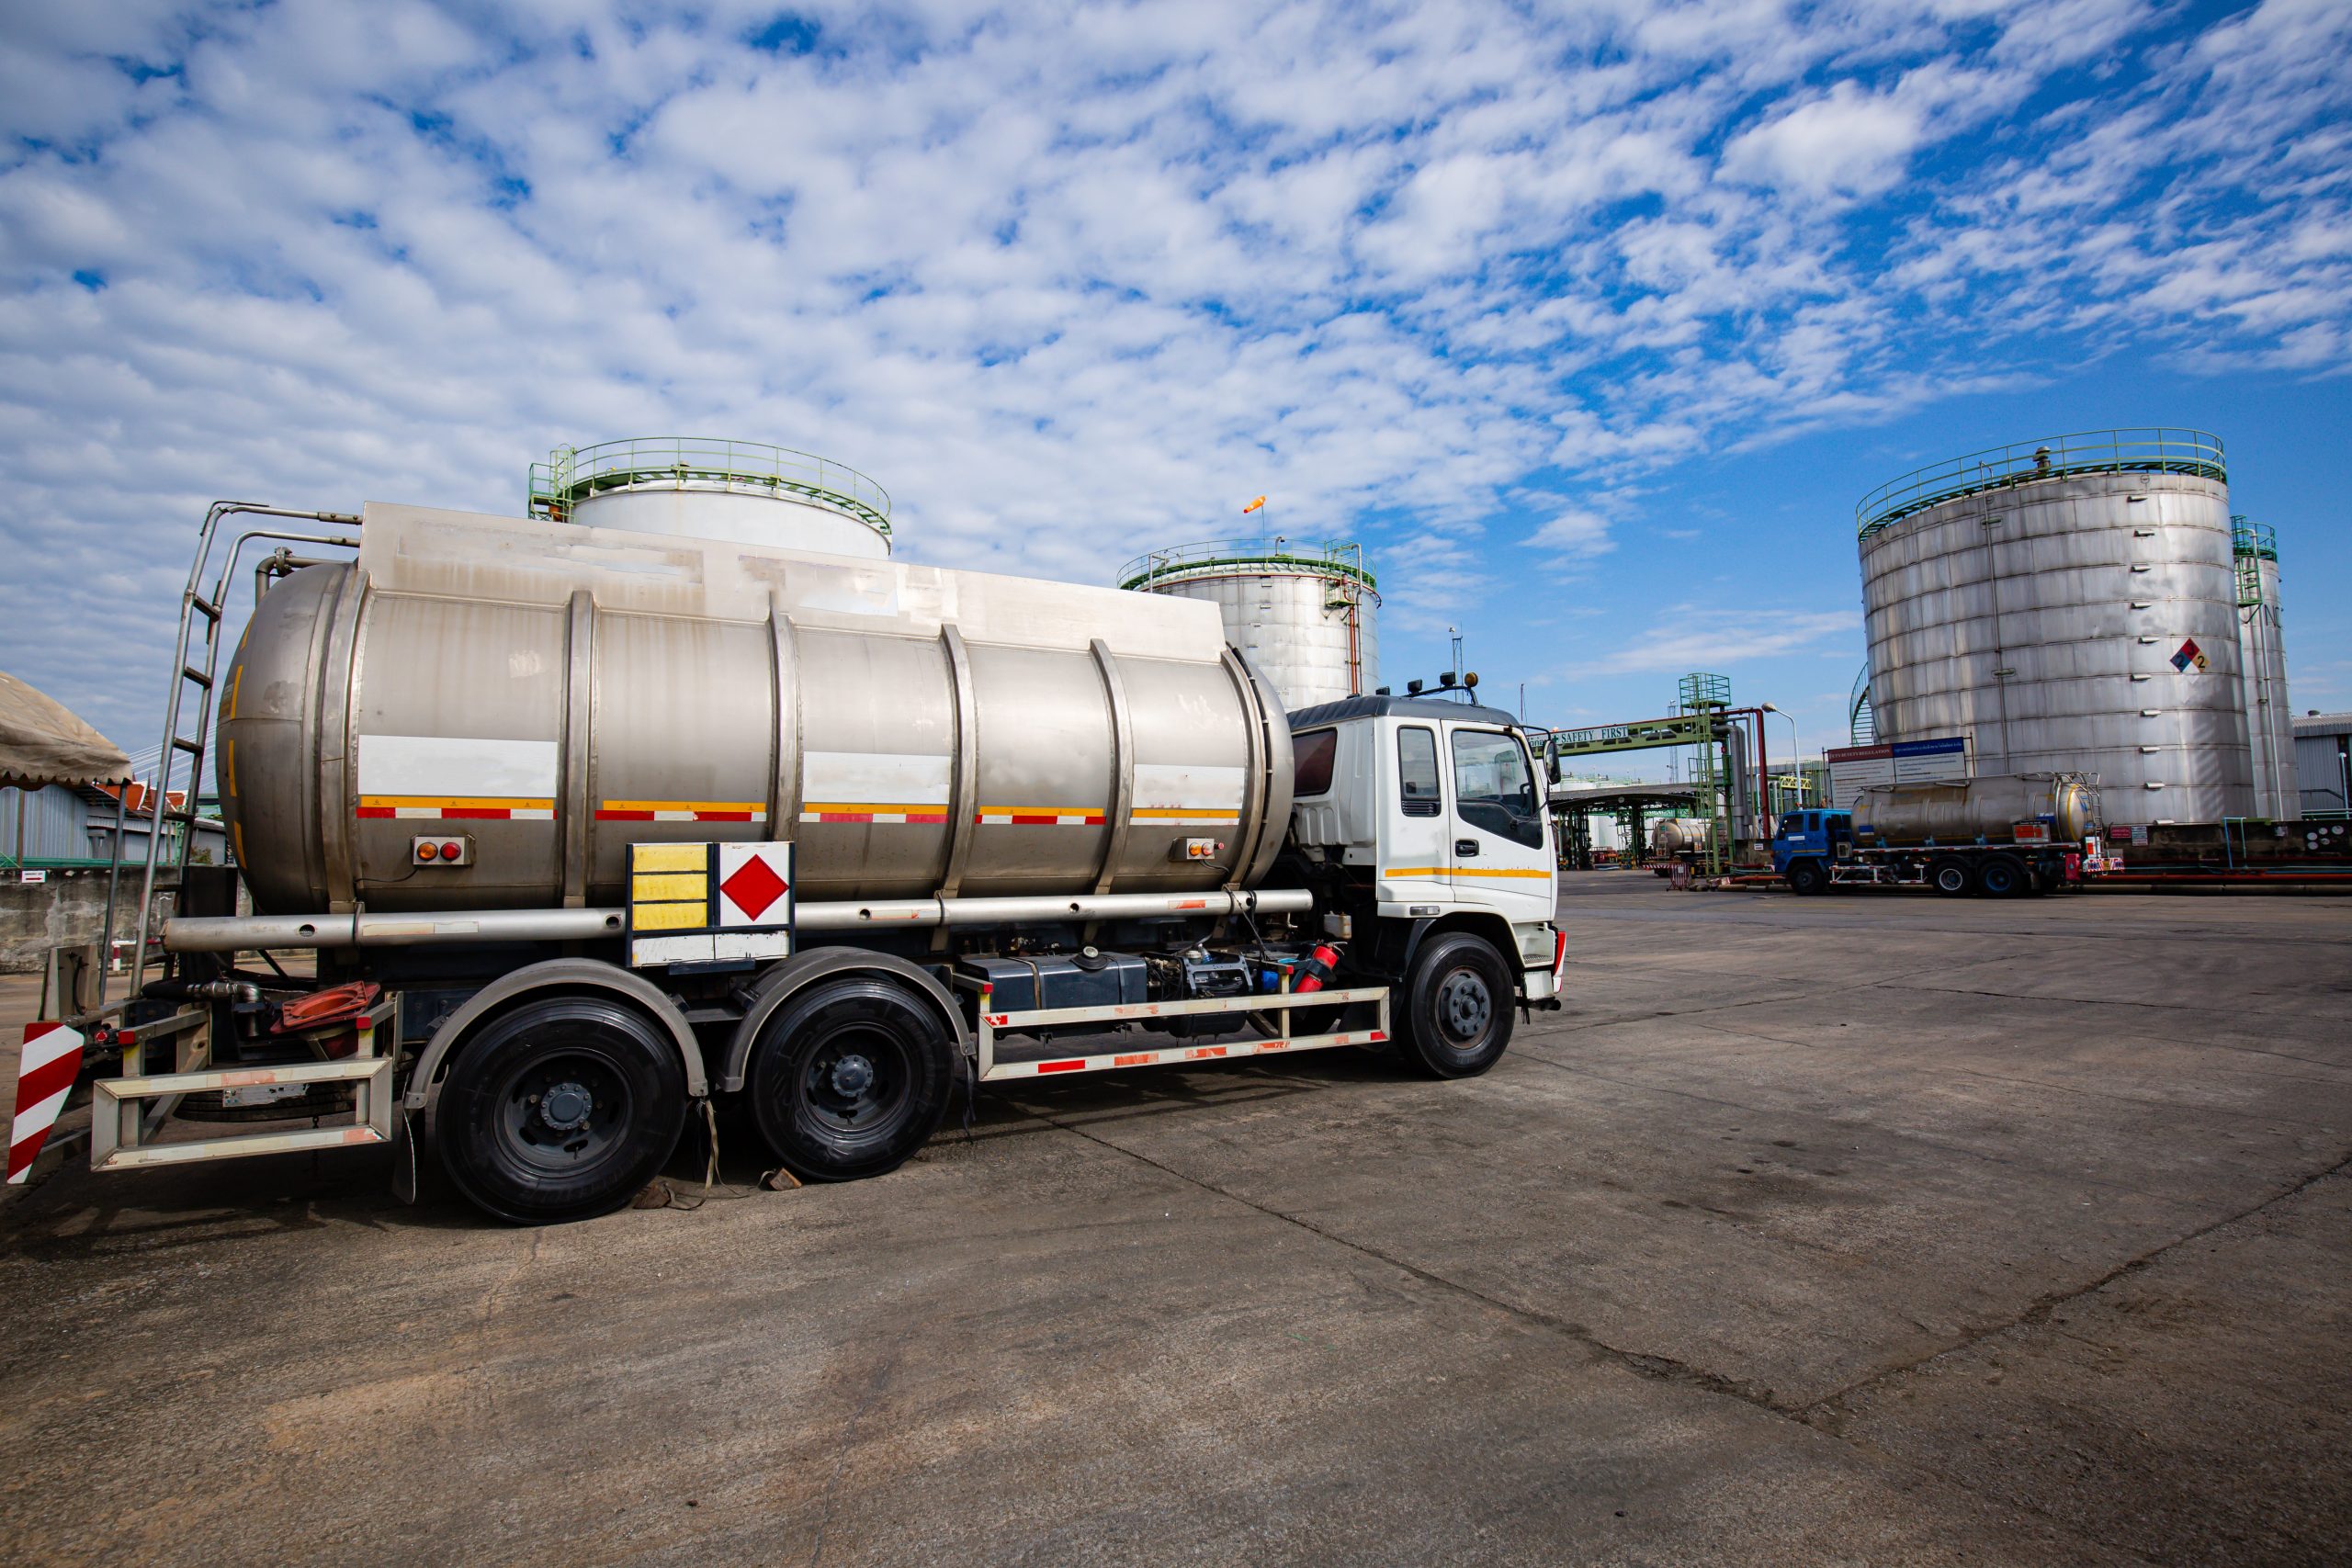 chemical tanker truck parked in a chemical plant